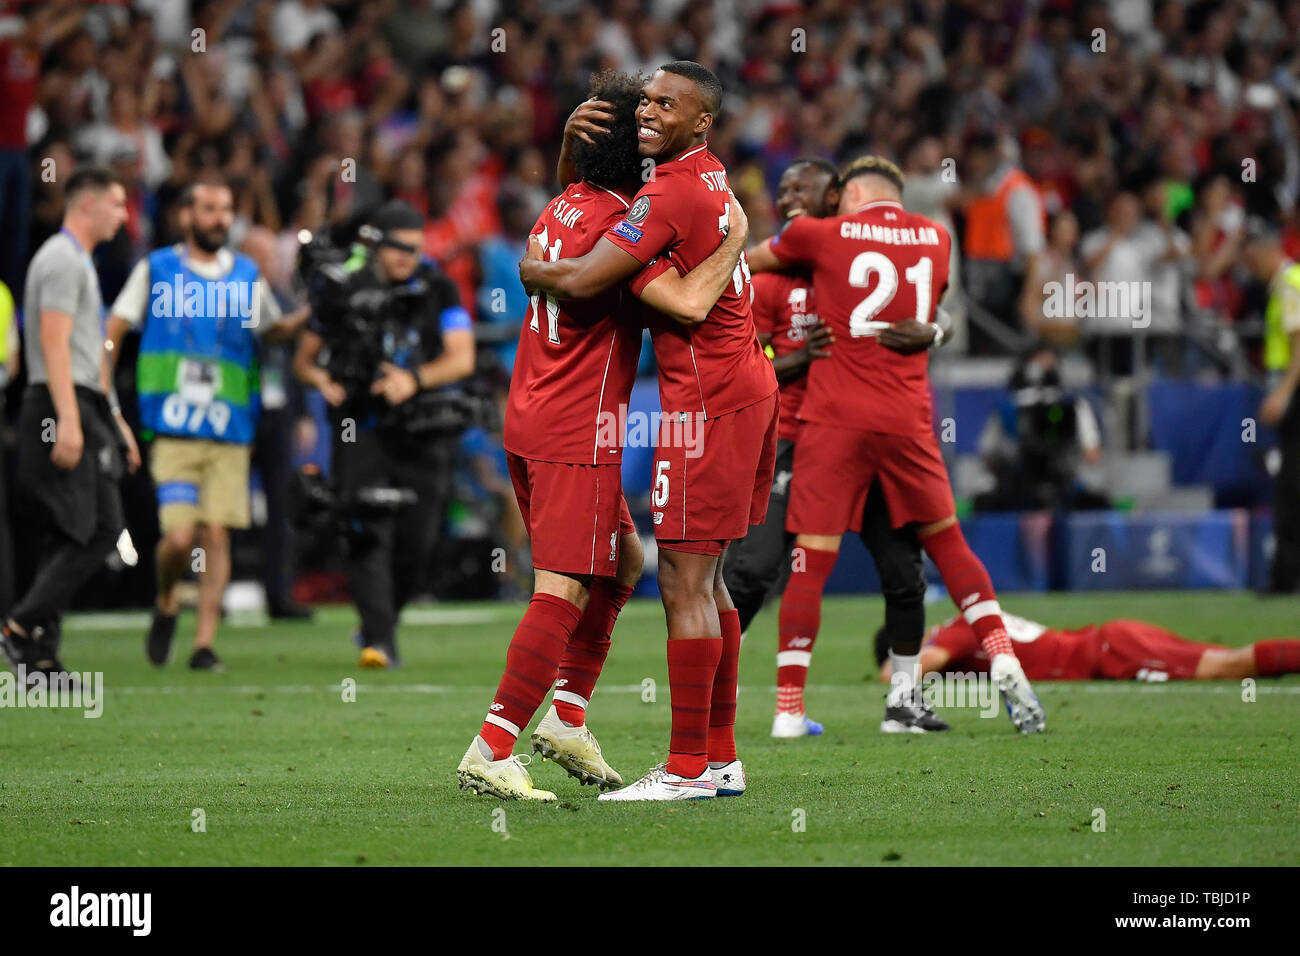 Madrid, Spain. 01st June, 2019. Liverpool's players of Liverpool FC celebrate at the end of the UEFA Champions League Final match between Tottenham Hotspur and Liverpool at Wanda Metropolitano Stadium, Madrid, Spain on 1 June 2019. Photo by Giuseppe Maffia. Credit: UK Sports Pics Ltd/Alamy Live News Stock Photo